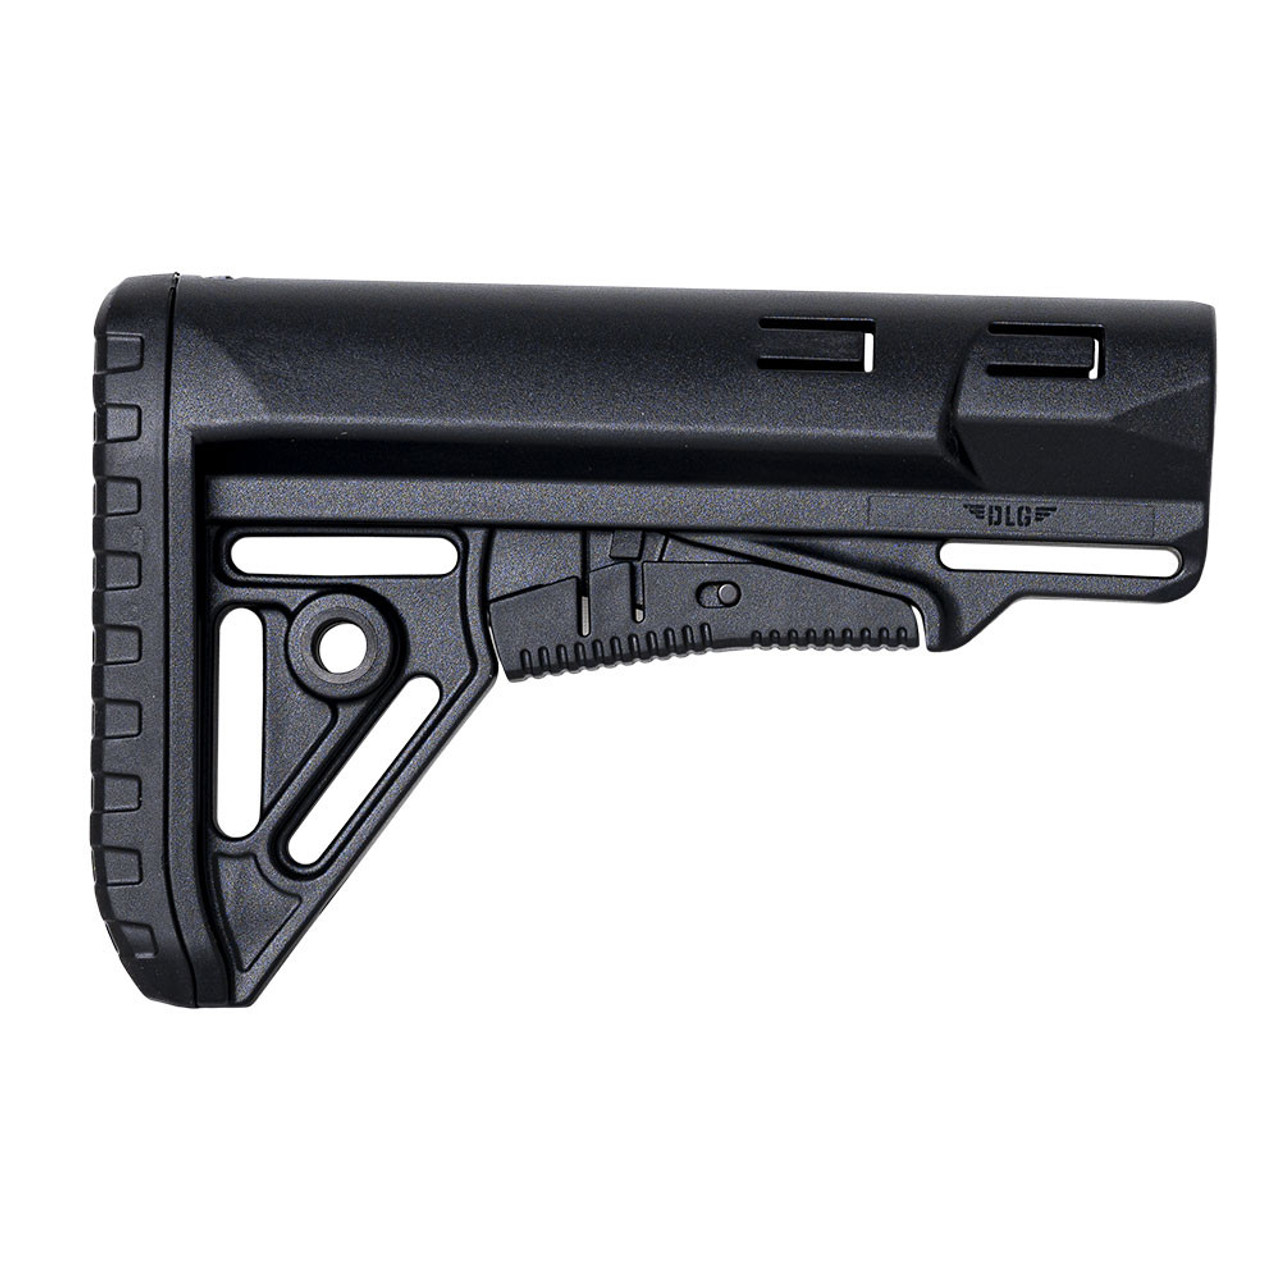 Ncstar VG131 Sharp Commercial Synthetic Collapsible Butt Stock Black